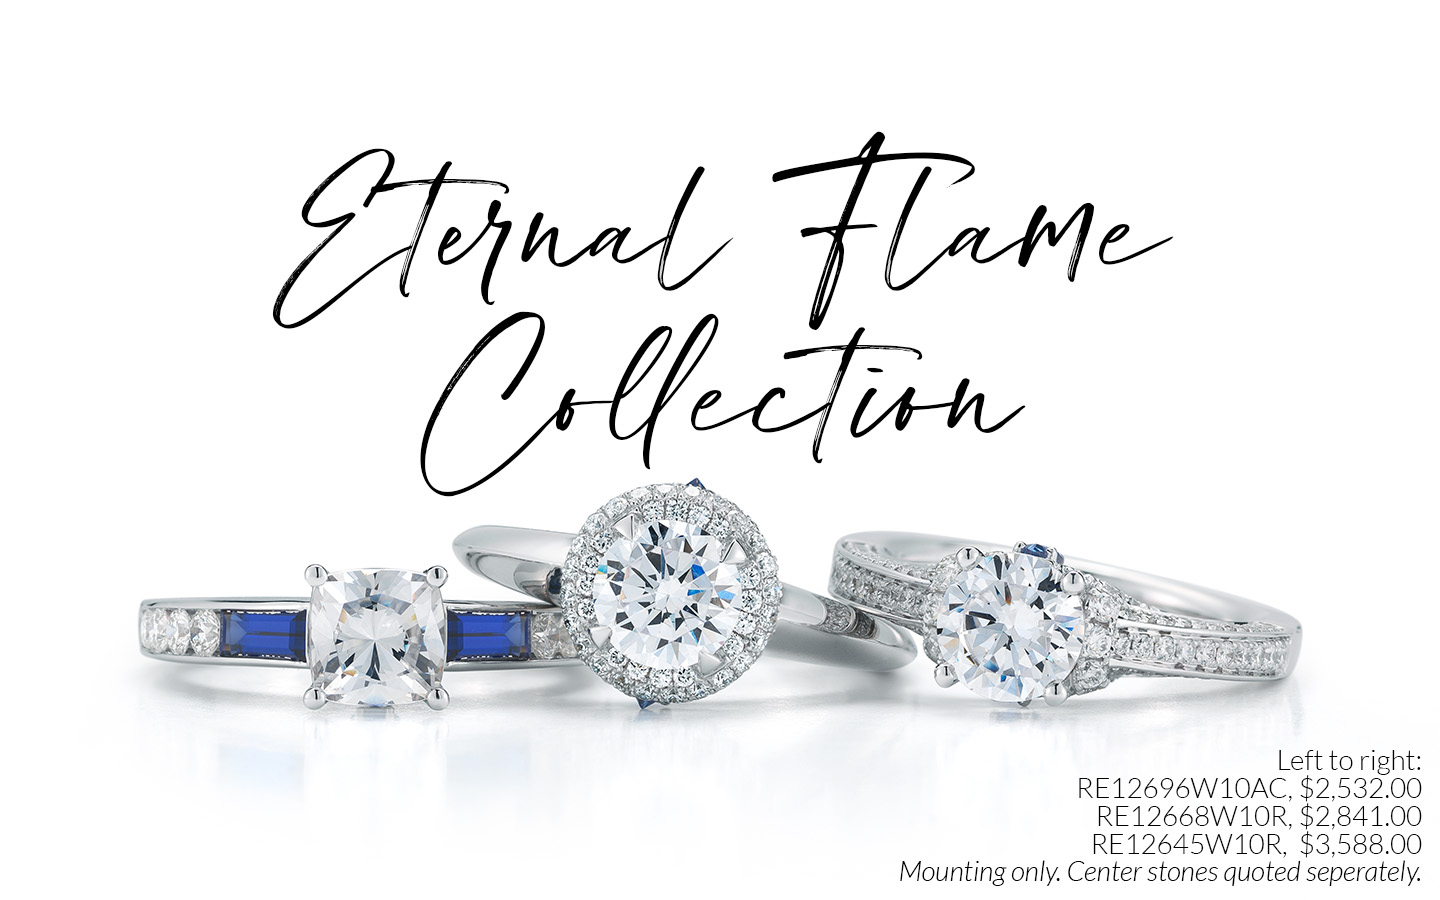 Eternal Flame Collection - RE12696W10AC, RE12668W10R and RE12645W10R